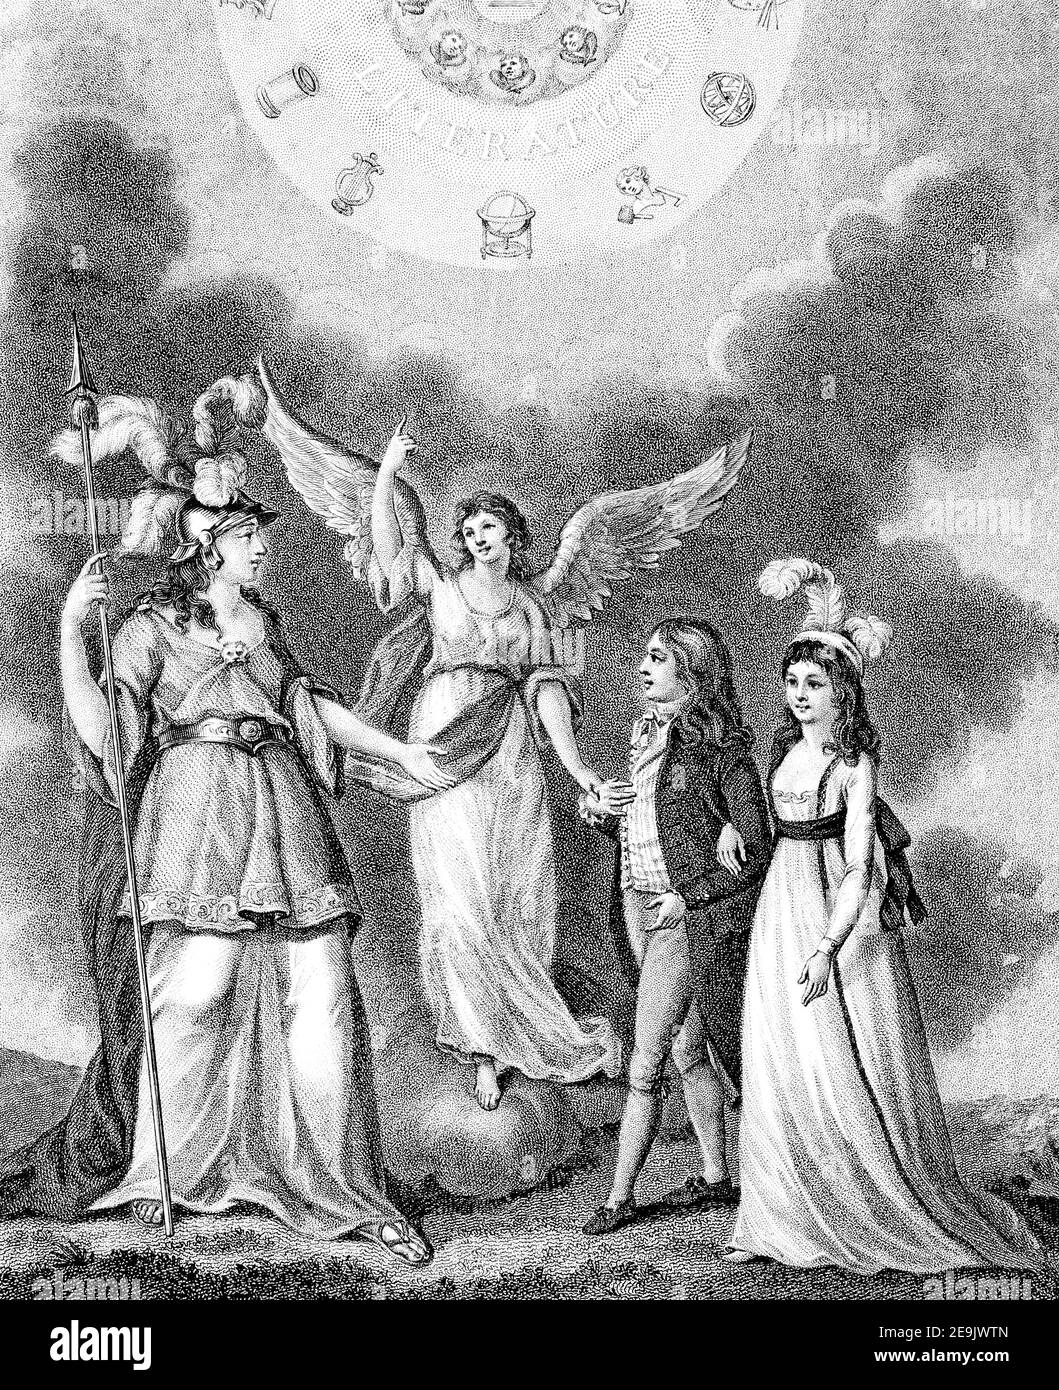 The Genius of Literature Presenting her Pupils to Minerva [Goddess of wisdom; counterpart of Greek Athena] Frontispiece From the Encyclopaedia Londinensis or, Universal dictionary of arts, sciences, and literature; Volume I;  Edited by Wilkes, John. Published in London in 1810 Stock Photo